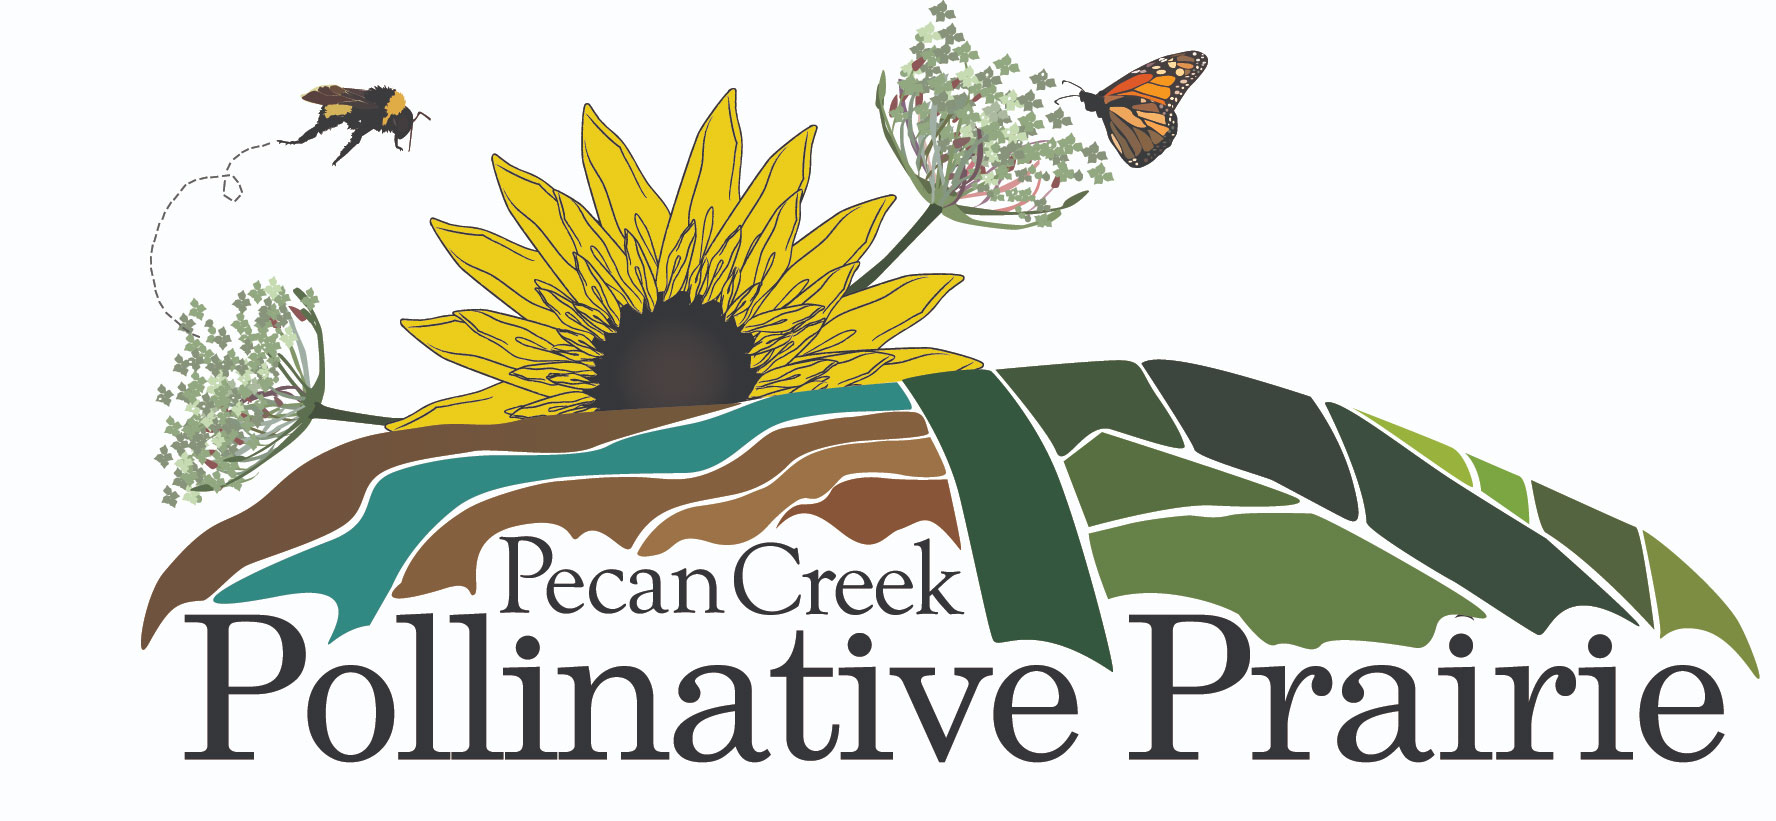 Pecan Creek Pollinative Prairie logo is featured with several flowers, a bee, and a monarch butterfly